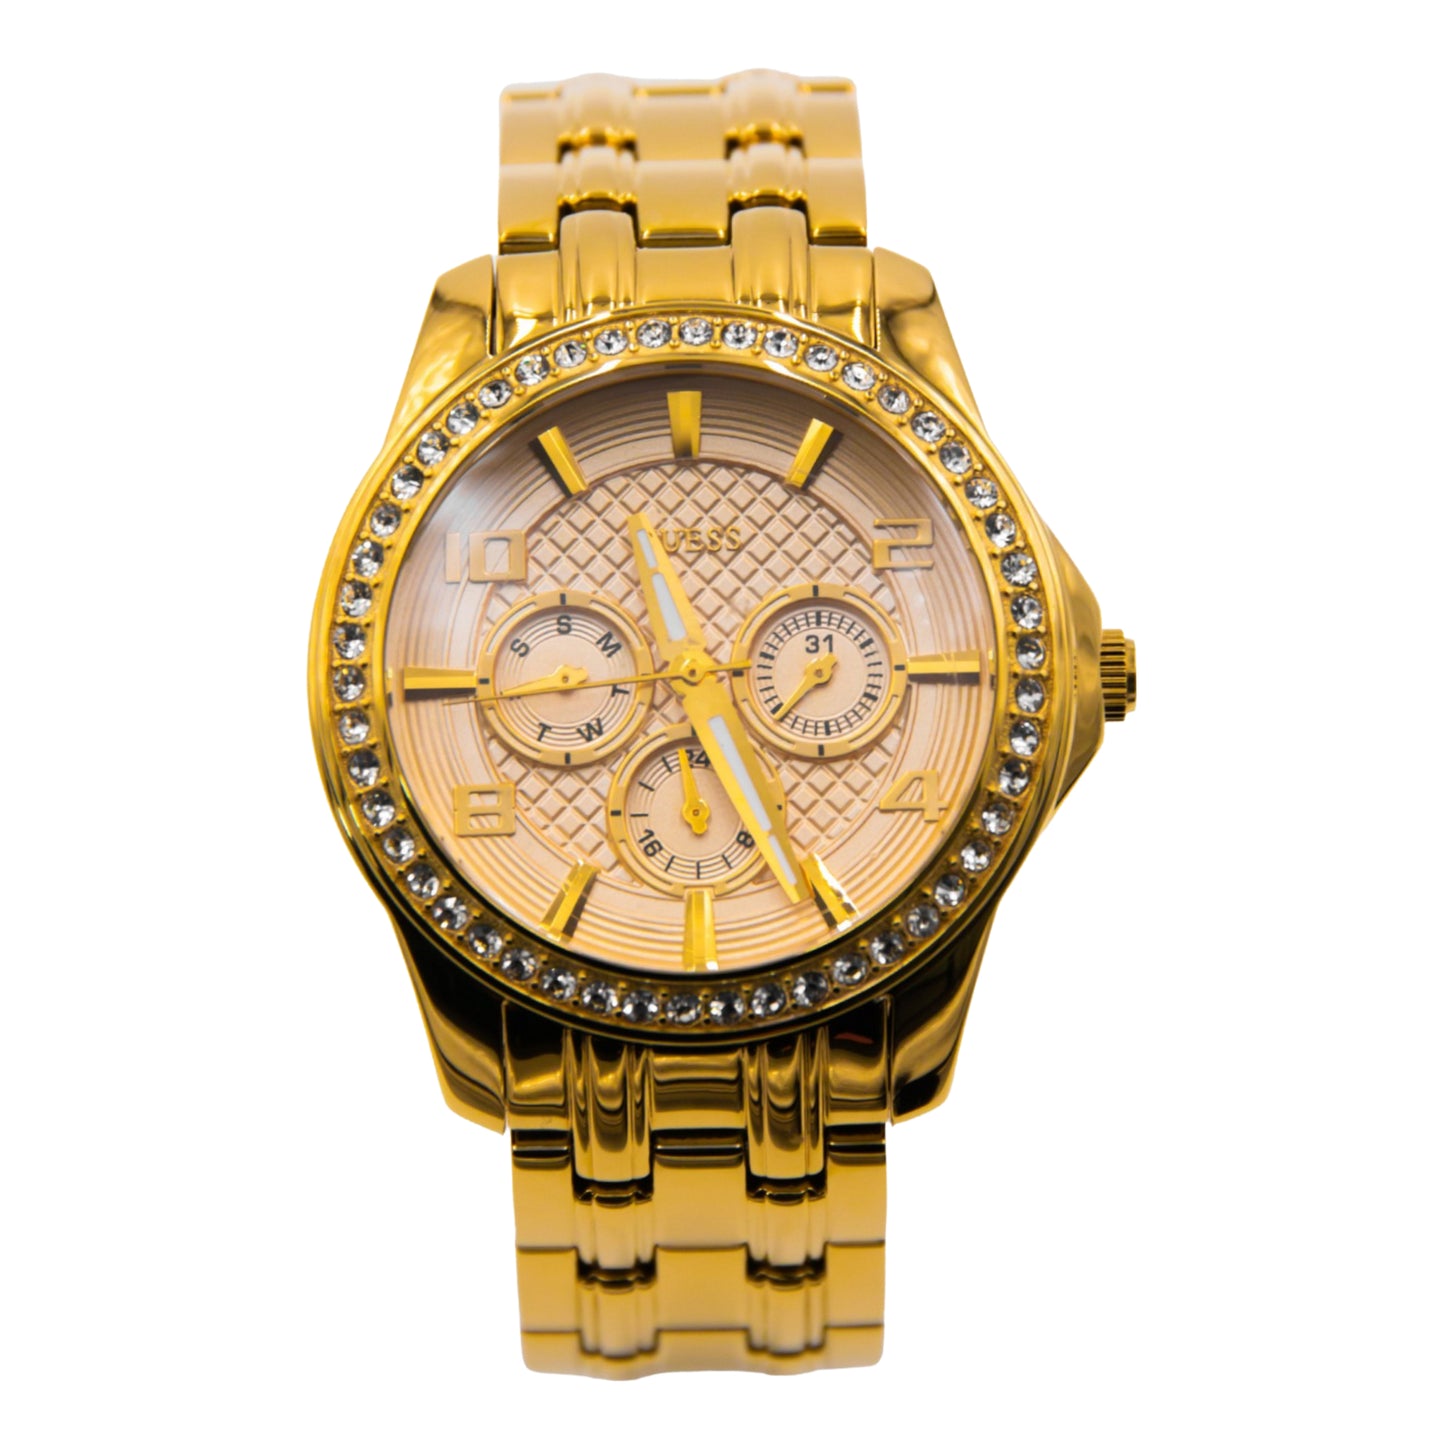 GUESS Women's Exec Multi Dial Crystal Watch - W0147L2 - 5904329824130